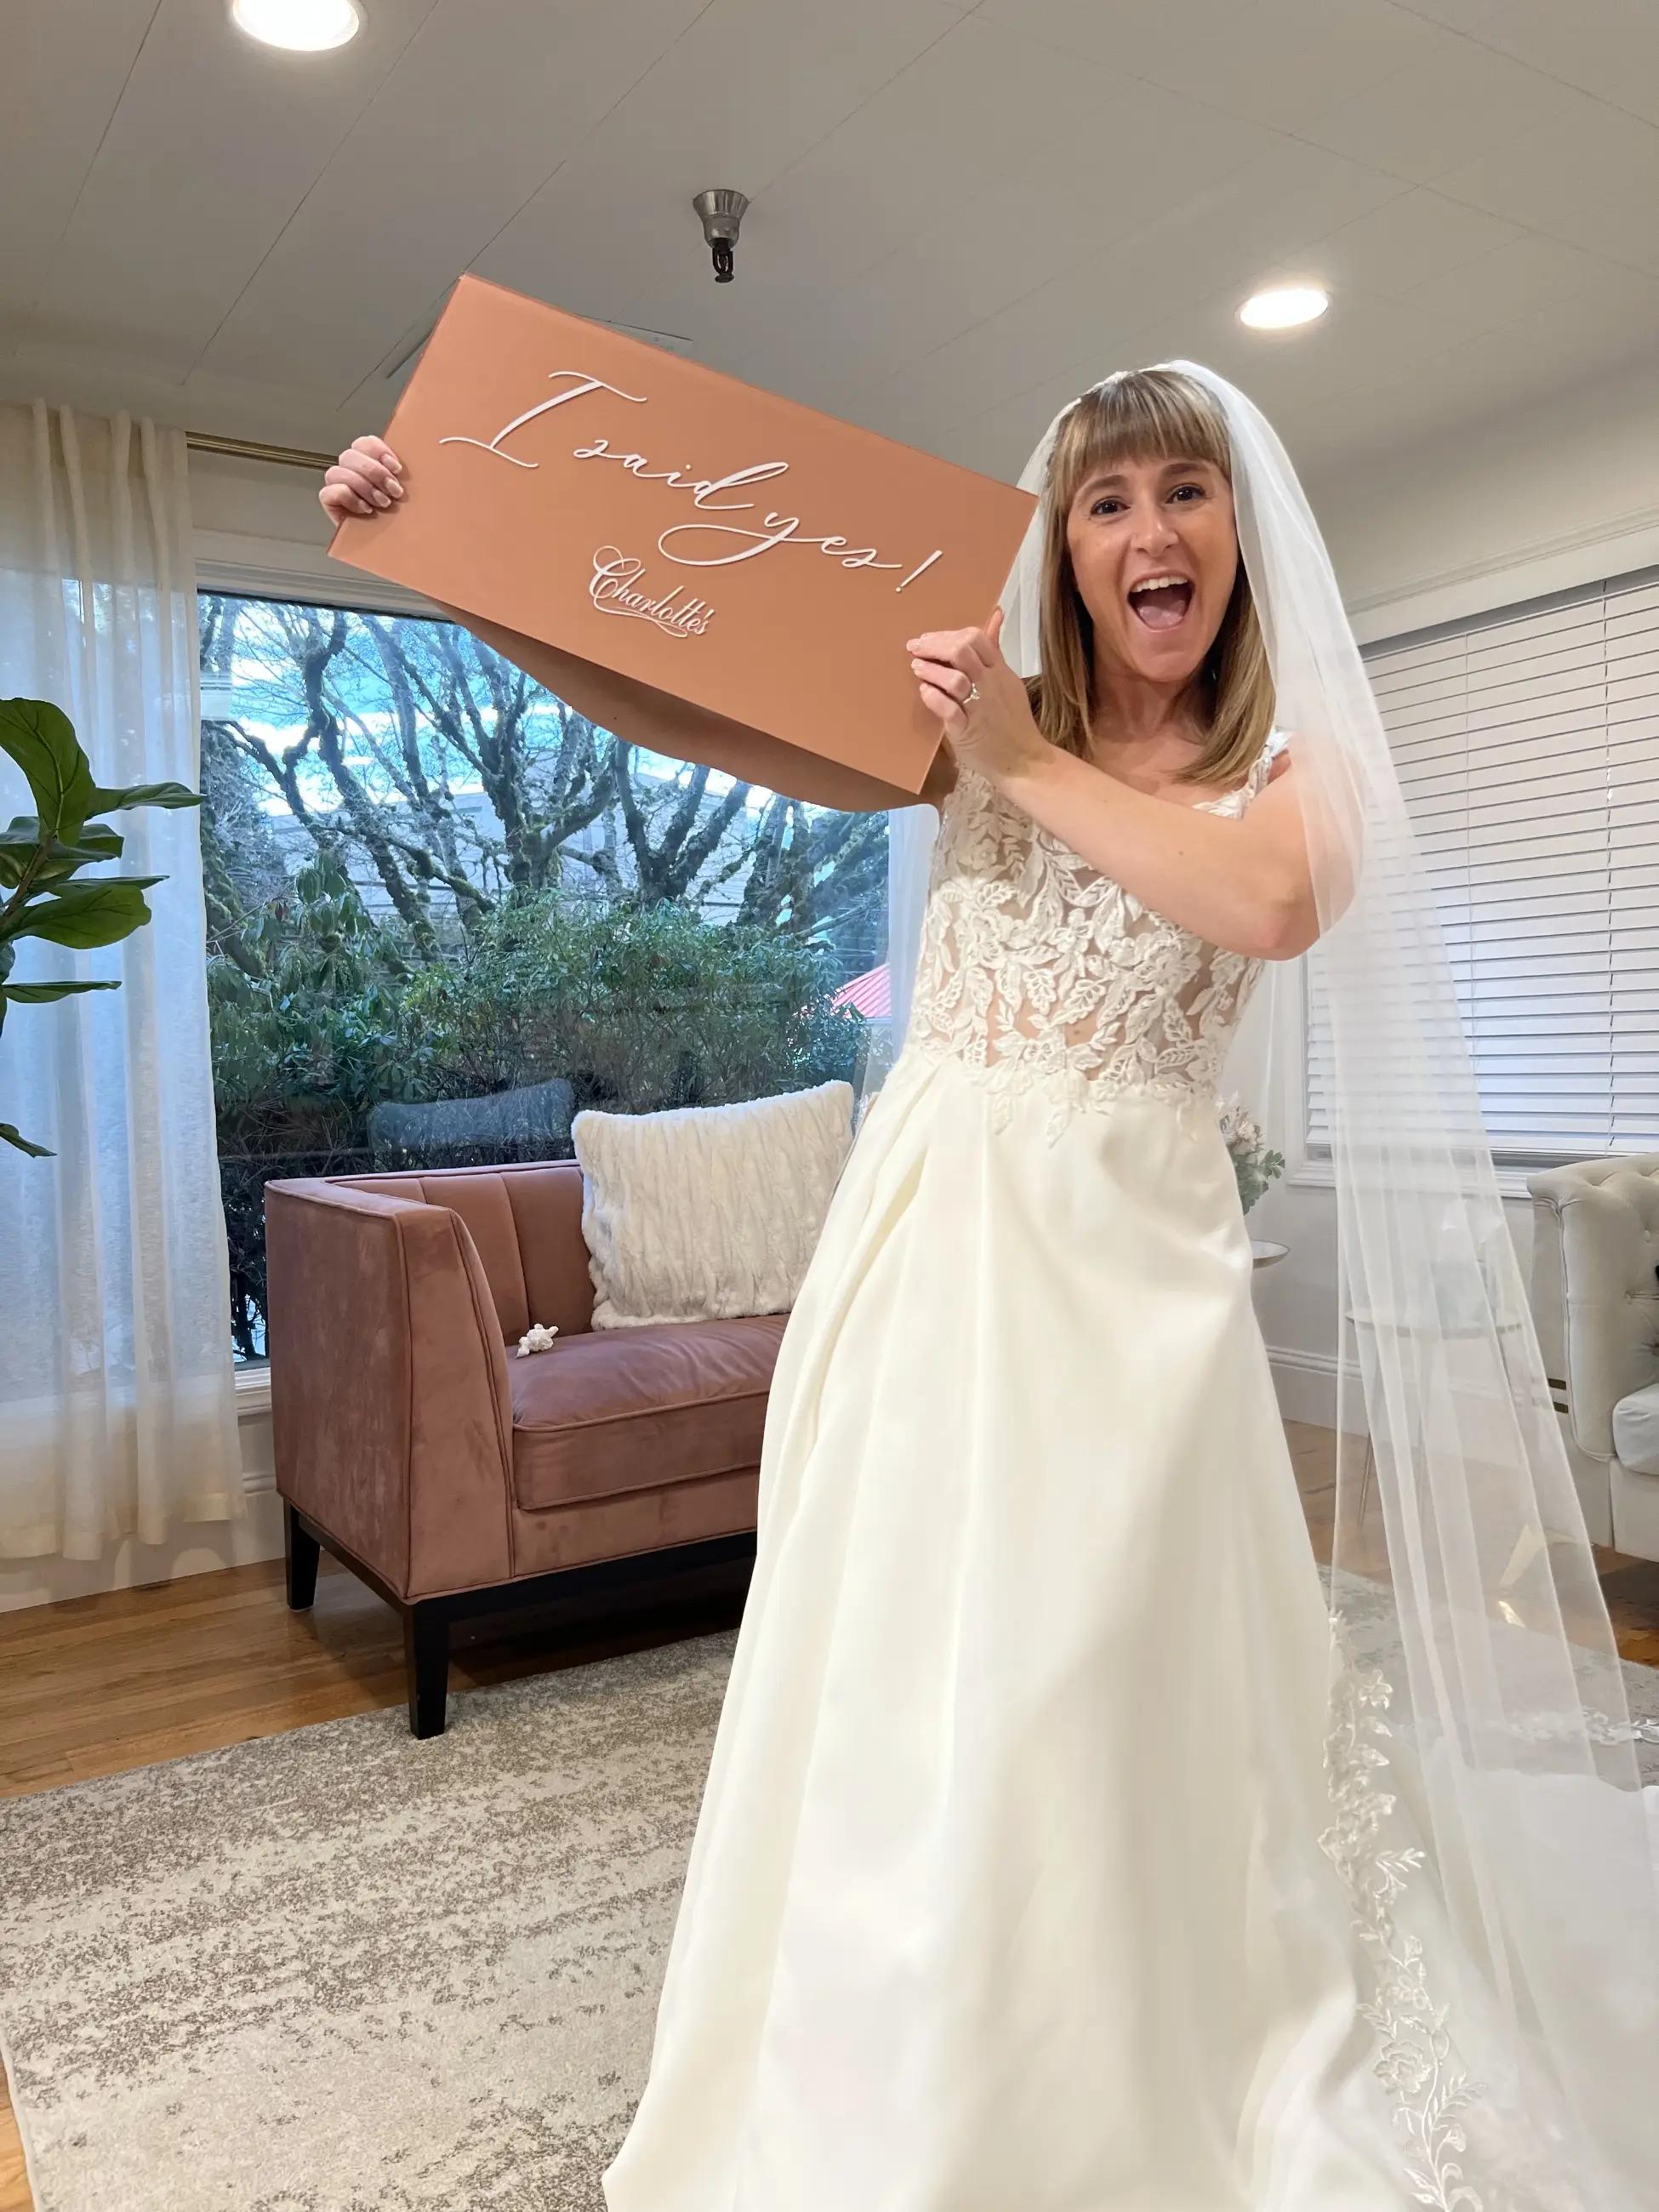 Bride at wedding dress shopping appointment, saying yes